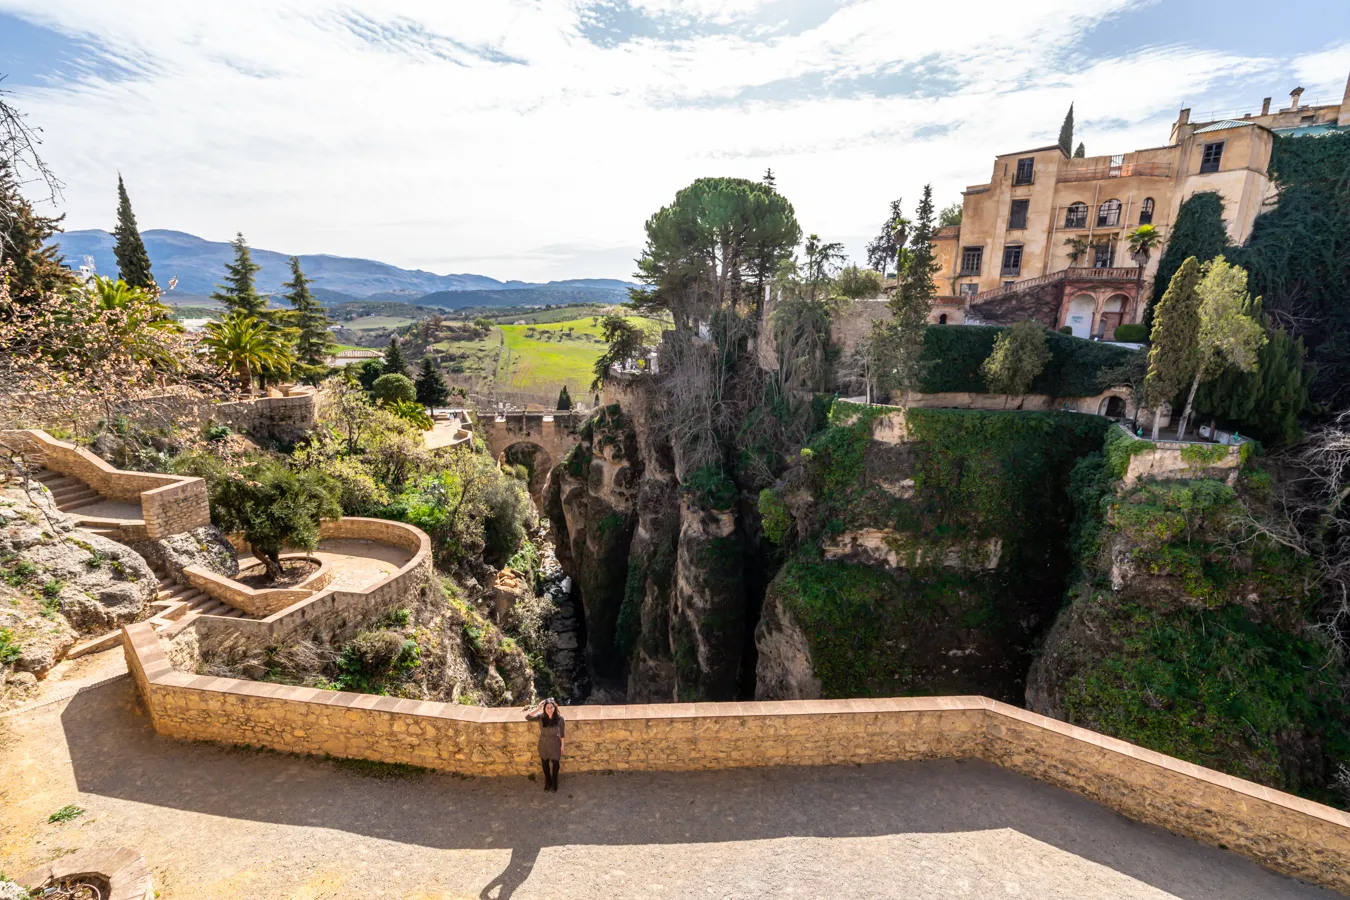 kate storm in cuenca gardens, one of the best things to do in ronda spain